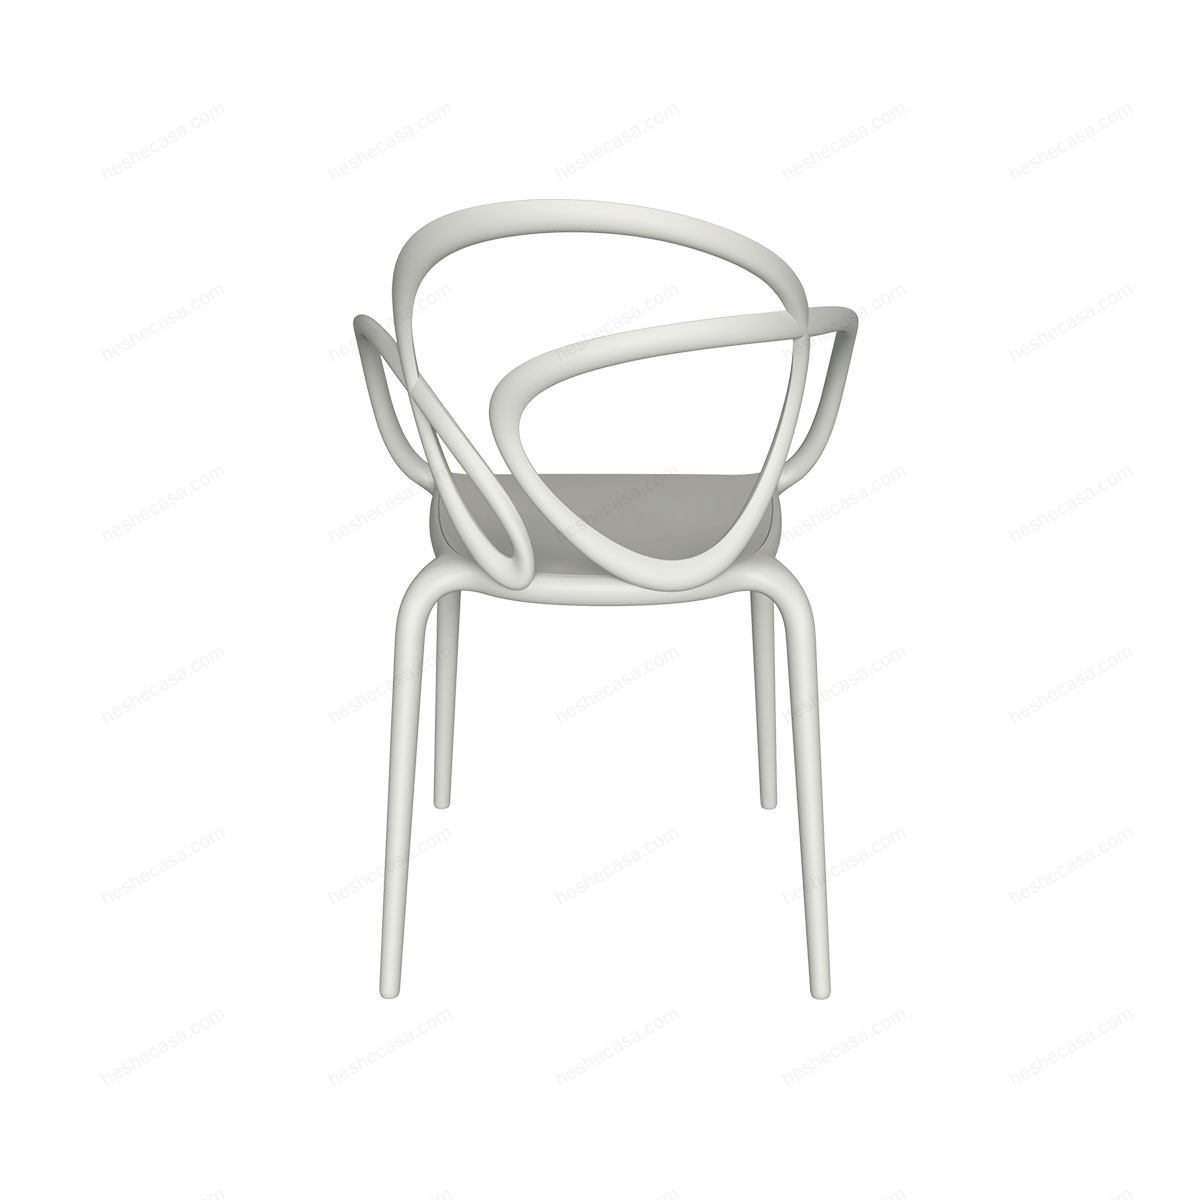 Loop Chair Without Cushion单椅